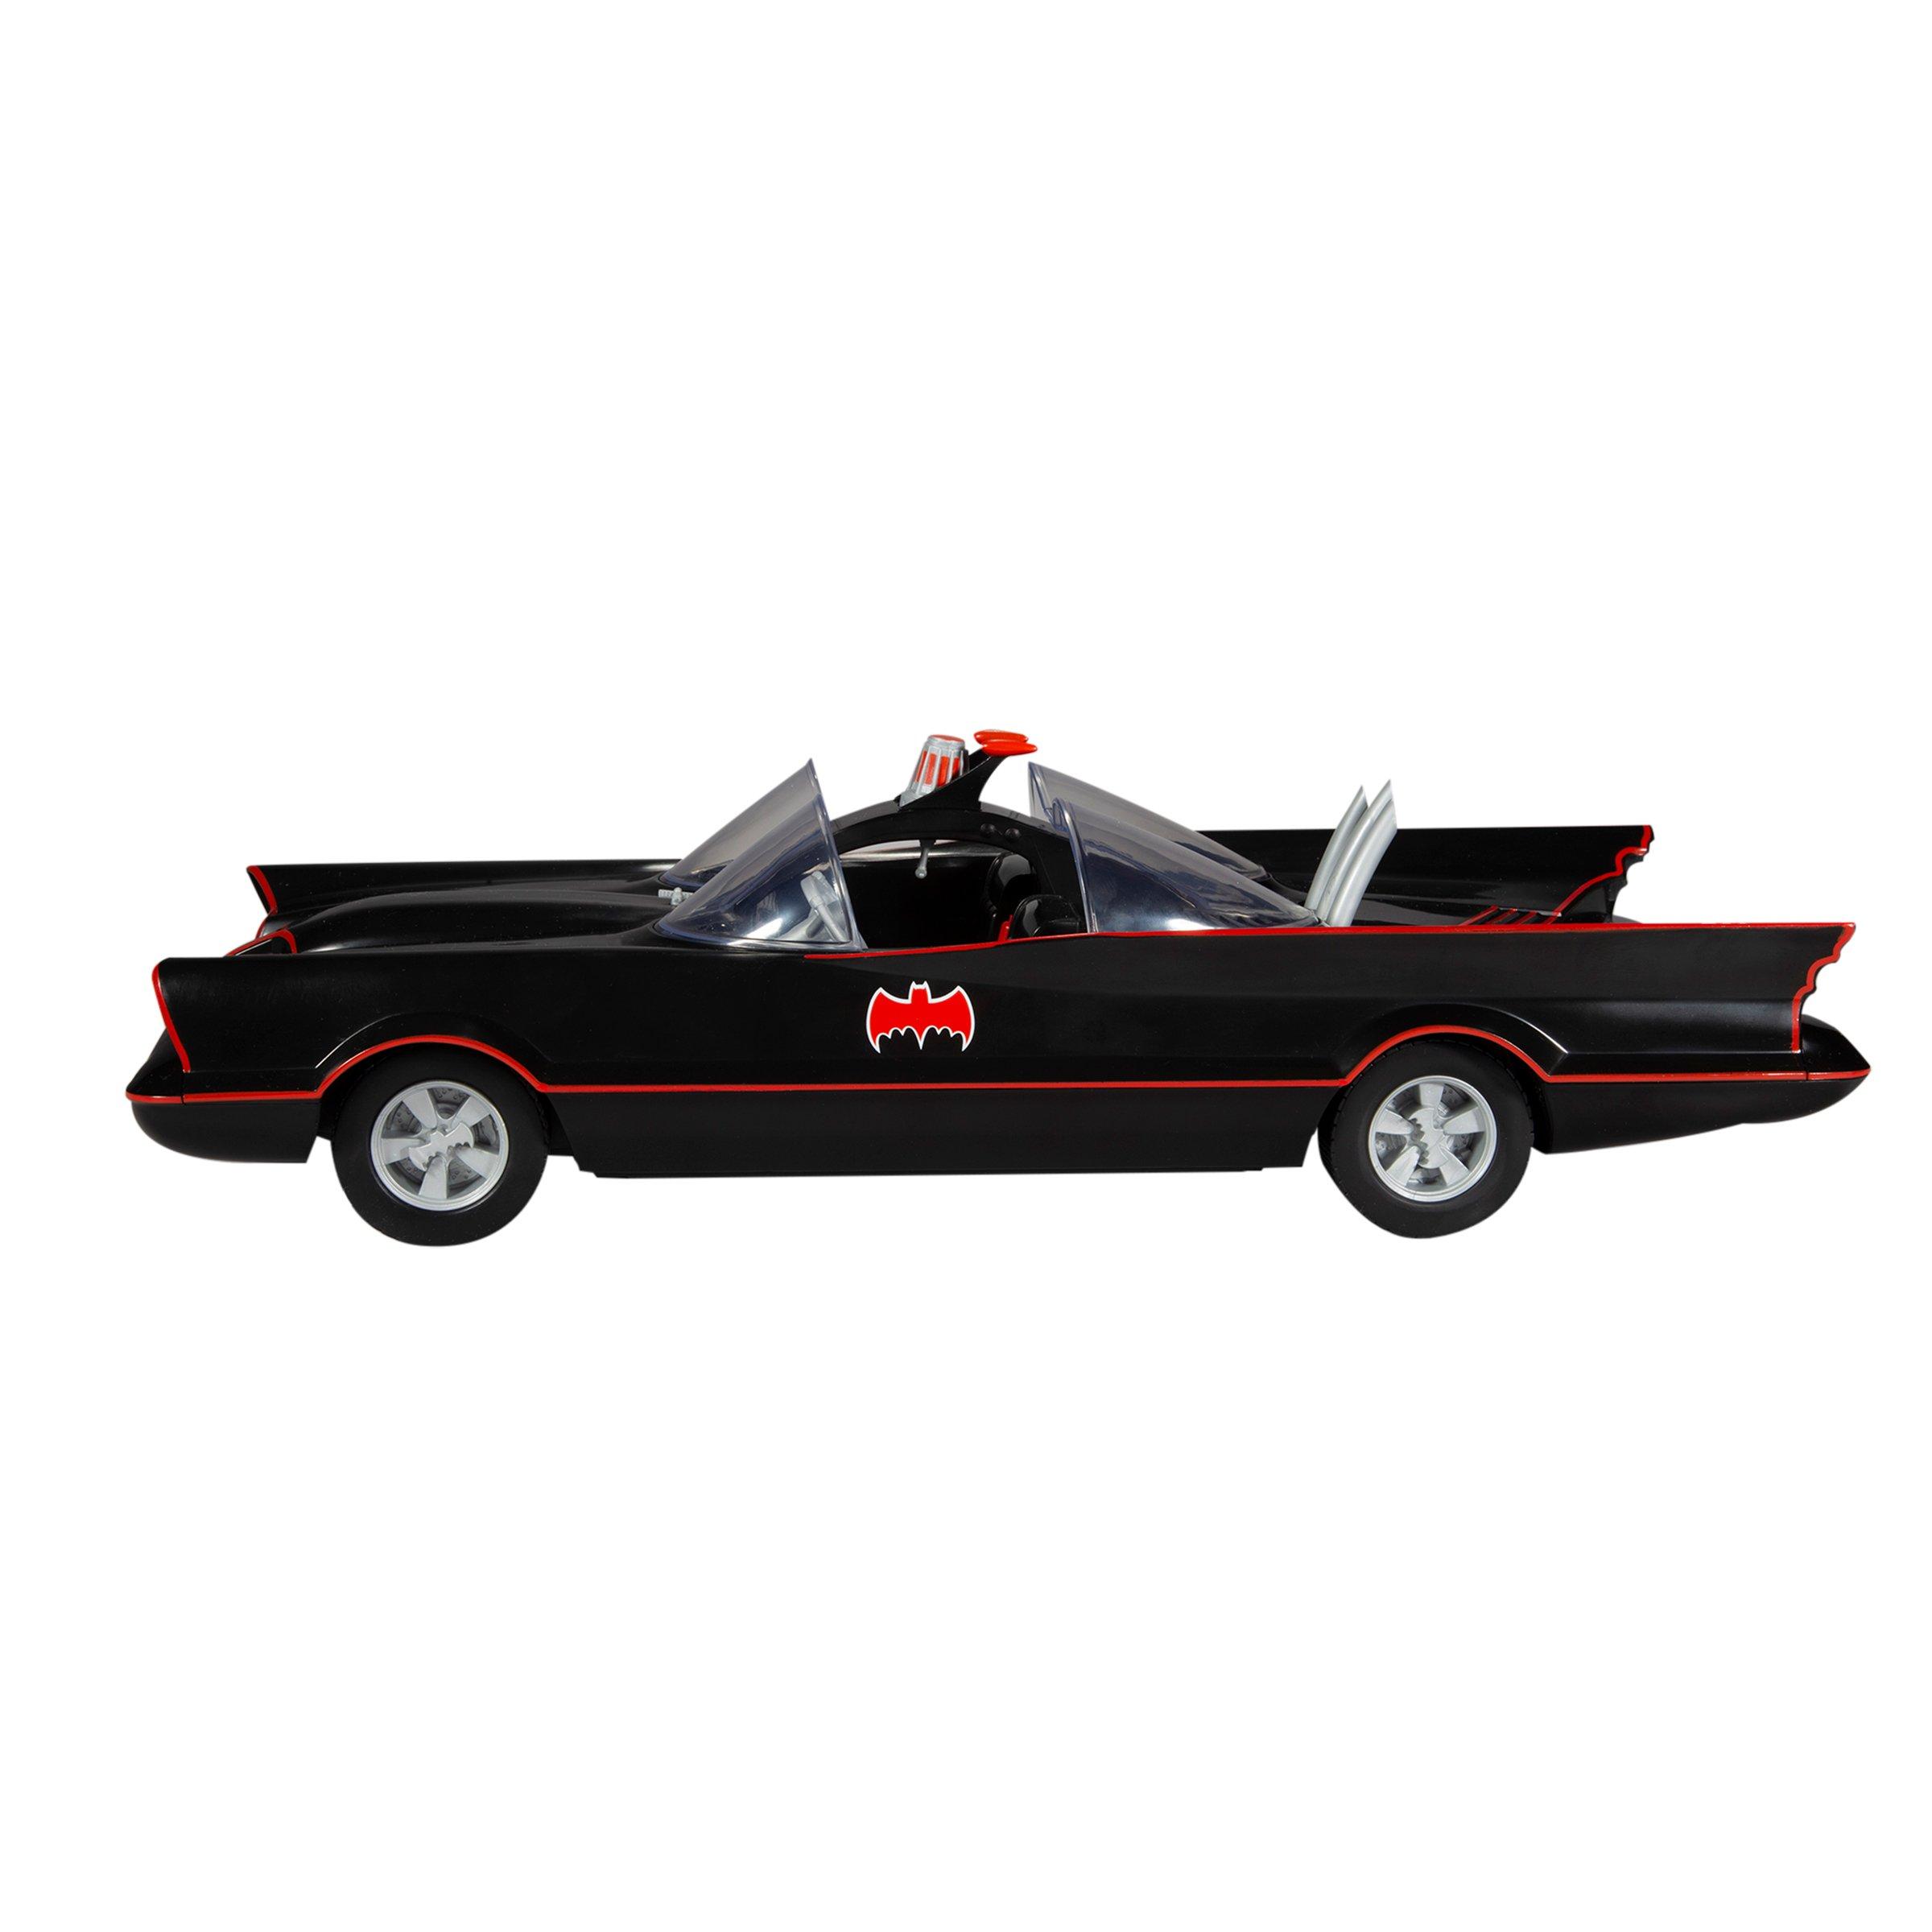 BATMAN CLASSIC TV SERIES Batmobile with Lights and Music Sculpture